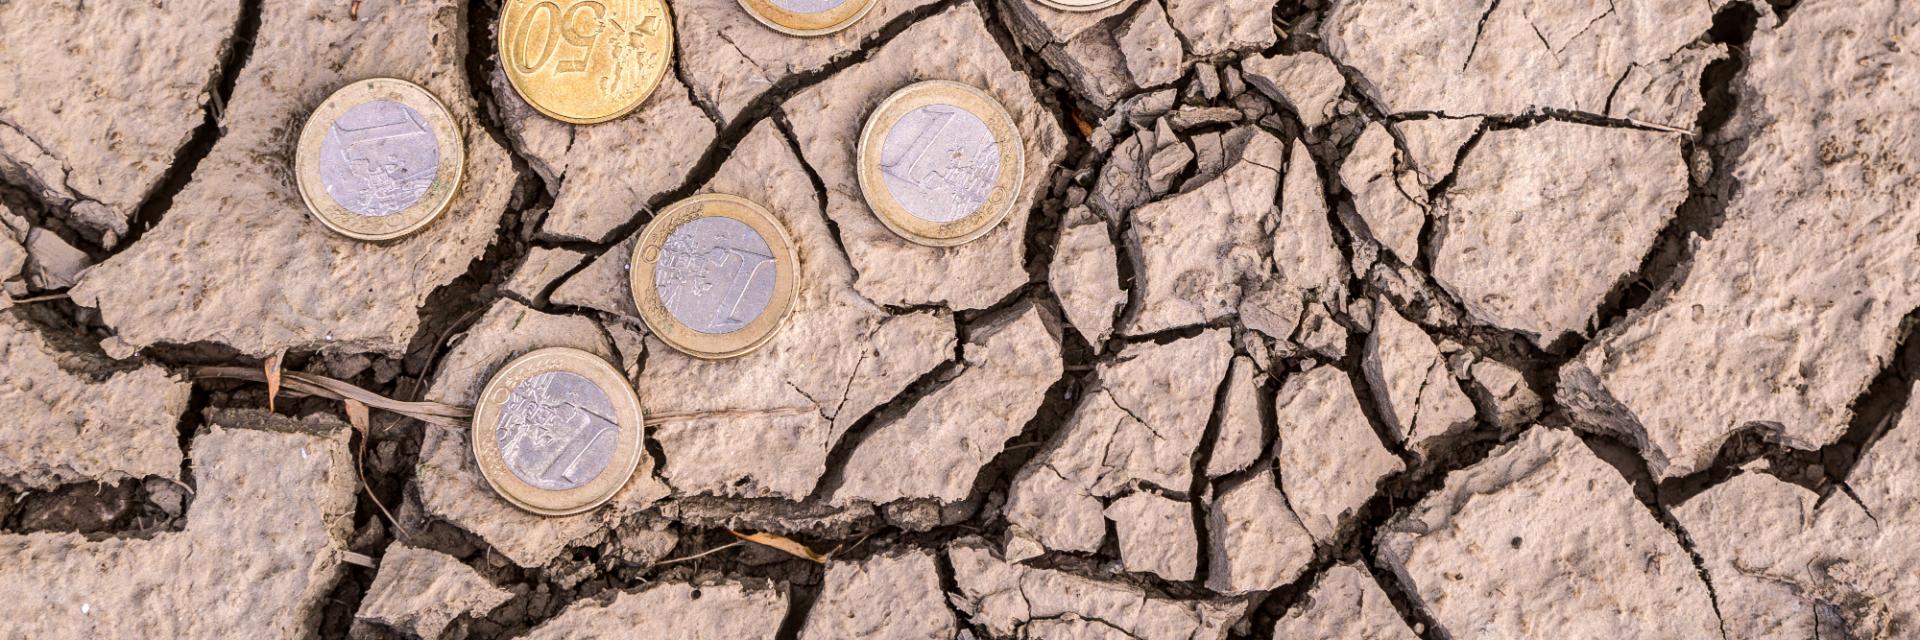 Developed countries asked to finance climate change in Africa